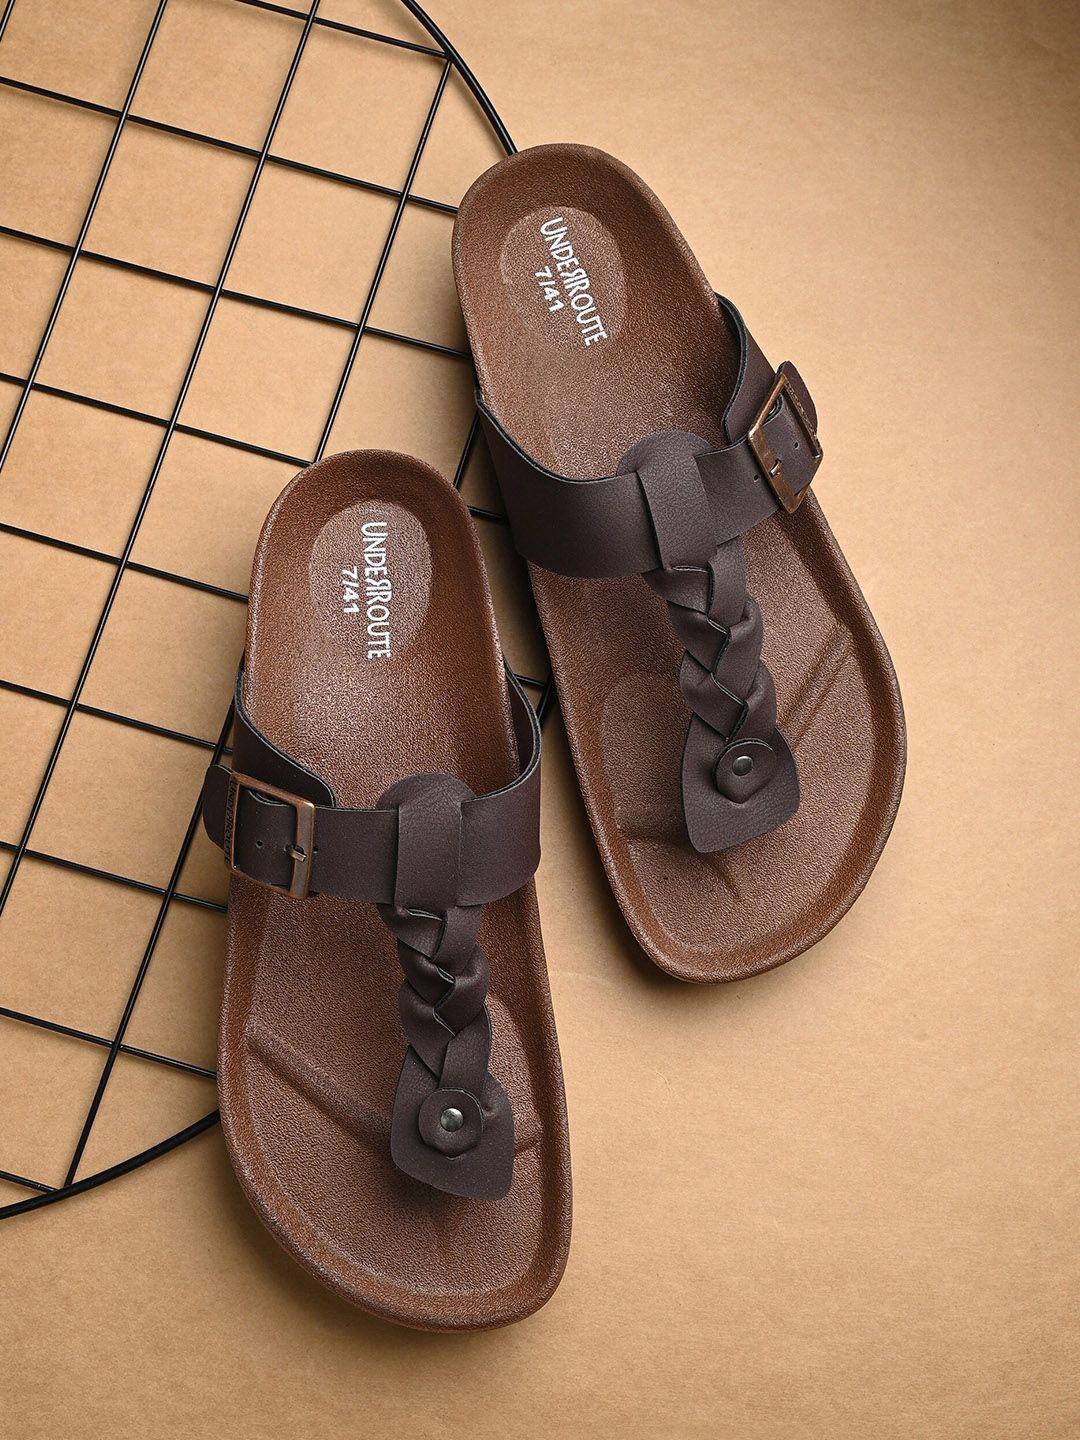 underroute-men-braided-comfort-sandals-with-buckle-detail